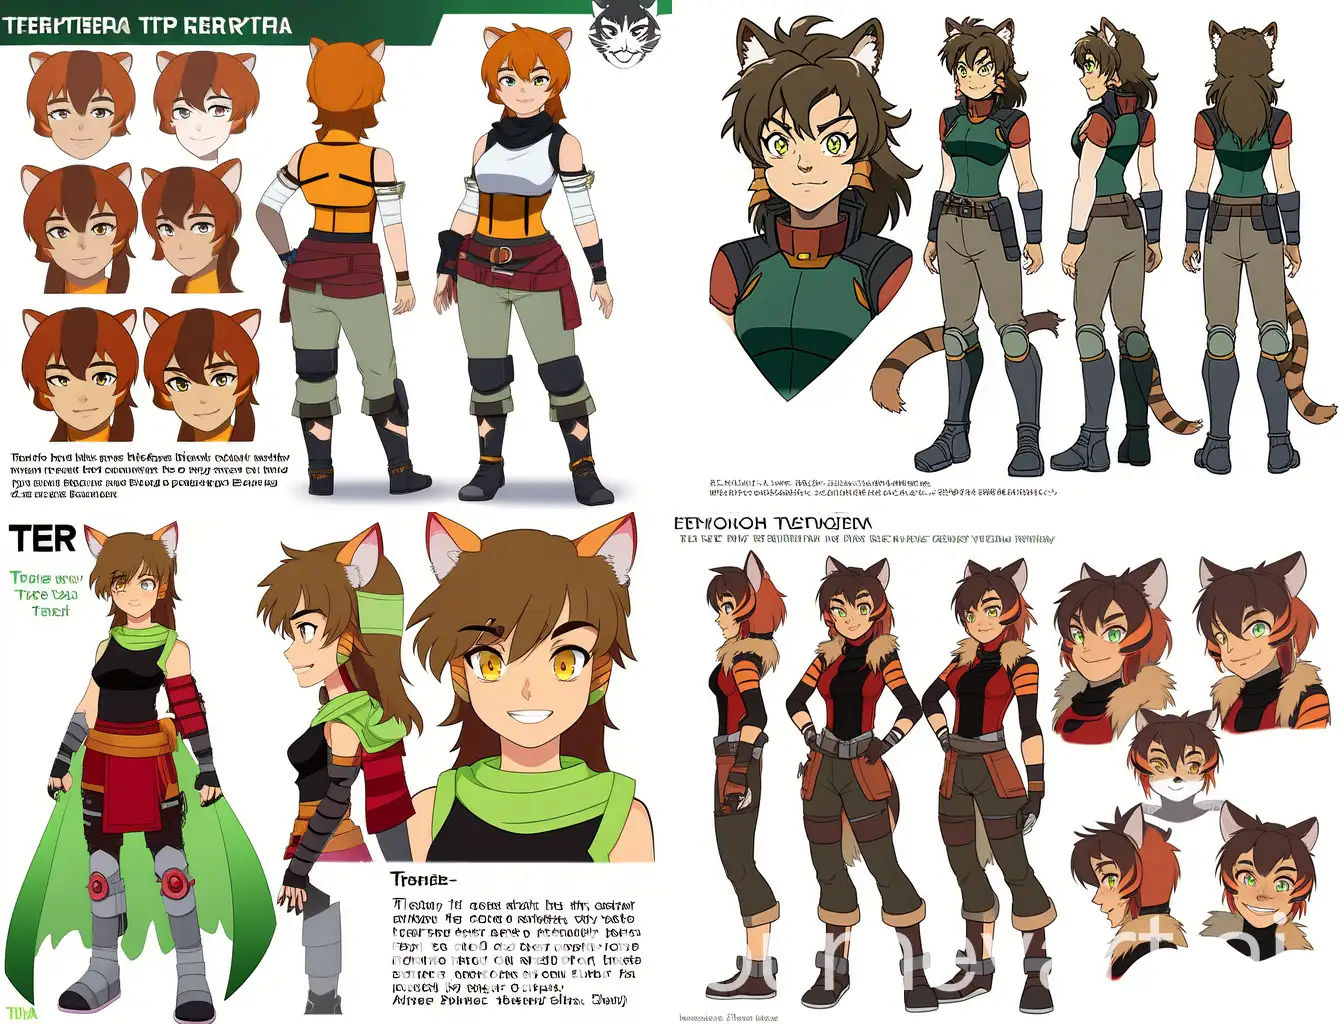 14-year-old young girl based in Sienna Khan from rwby, smiling face, tiger ears (tabby), green eyes, a tomboy girl, brown fur, She has tiger line markings on her skin. The character should be wearing Spartan warrior dark crimson and light bronze, colorful costumes, clothes use red and black colors for the clothes, including a white scarf tied at the waist, clothes with exposed stomach, masterpiece, looking into distance.